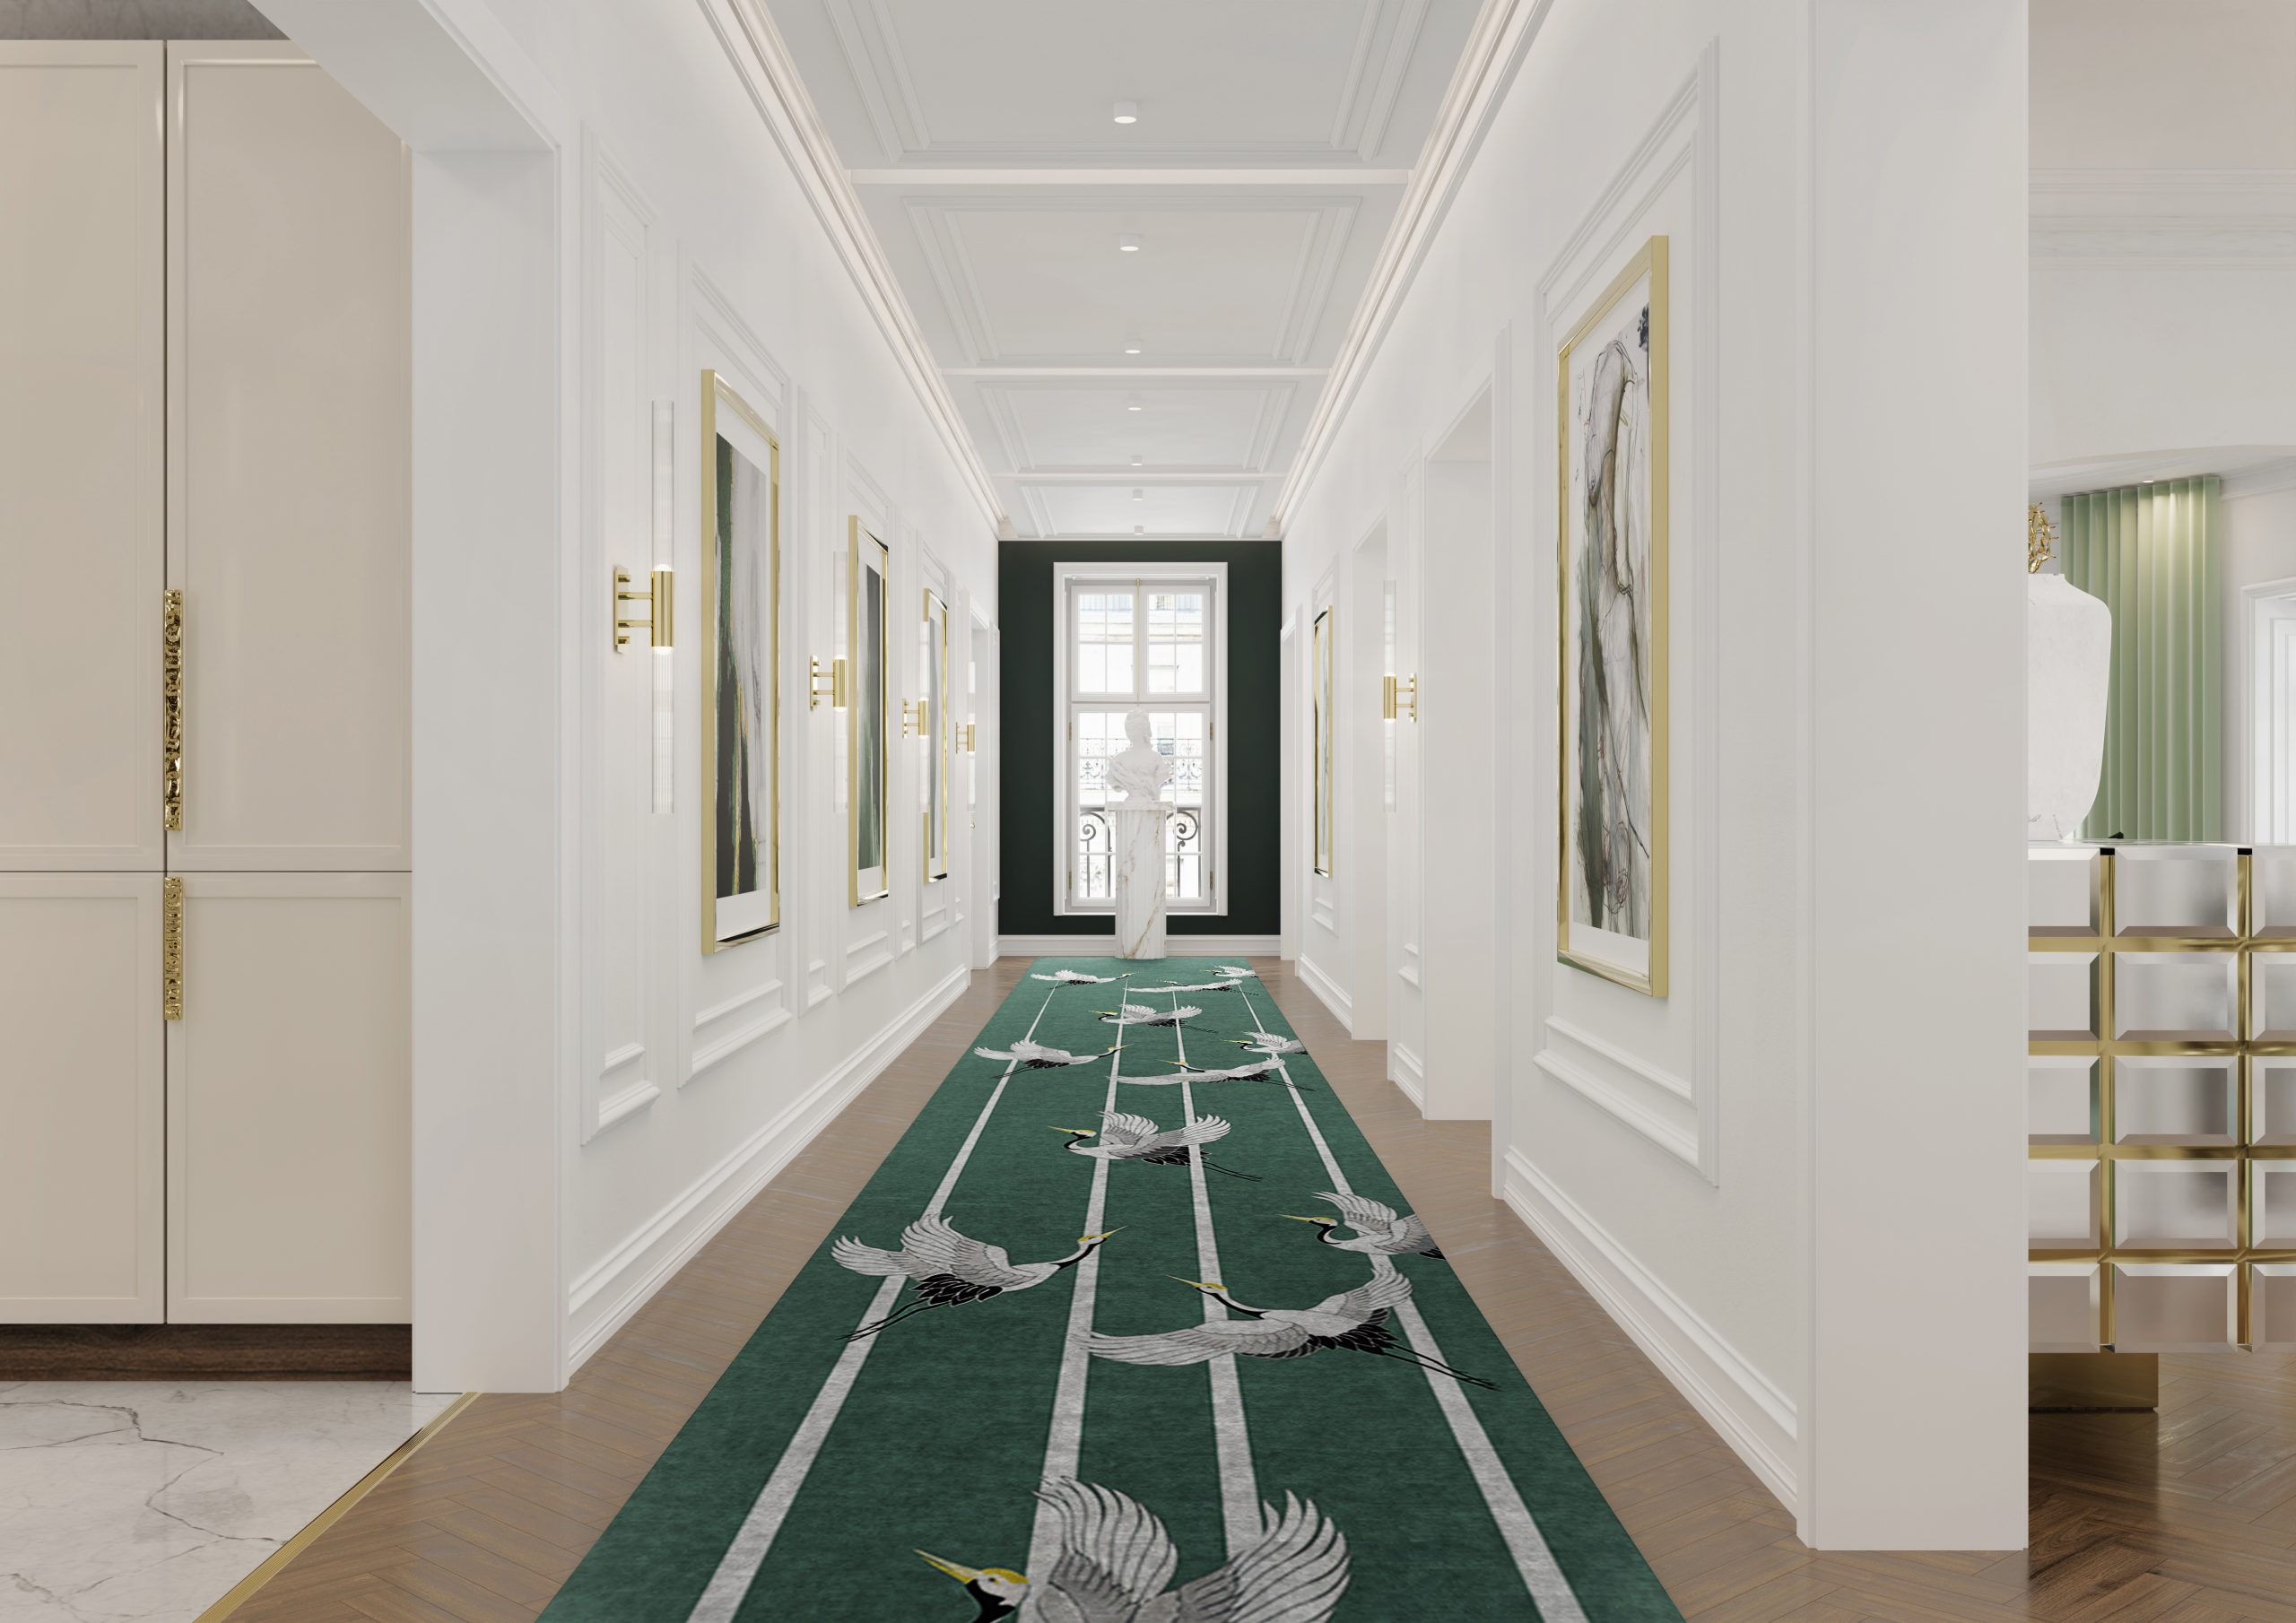 Modern hotel hallway design with Heron rug - The Best Modern Rugs To Create a Unique Hotel Decor